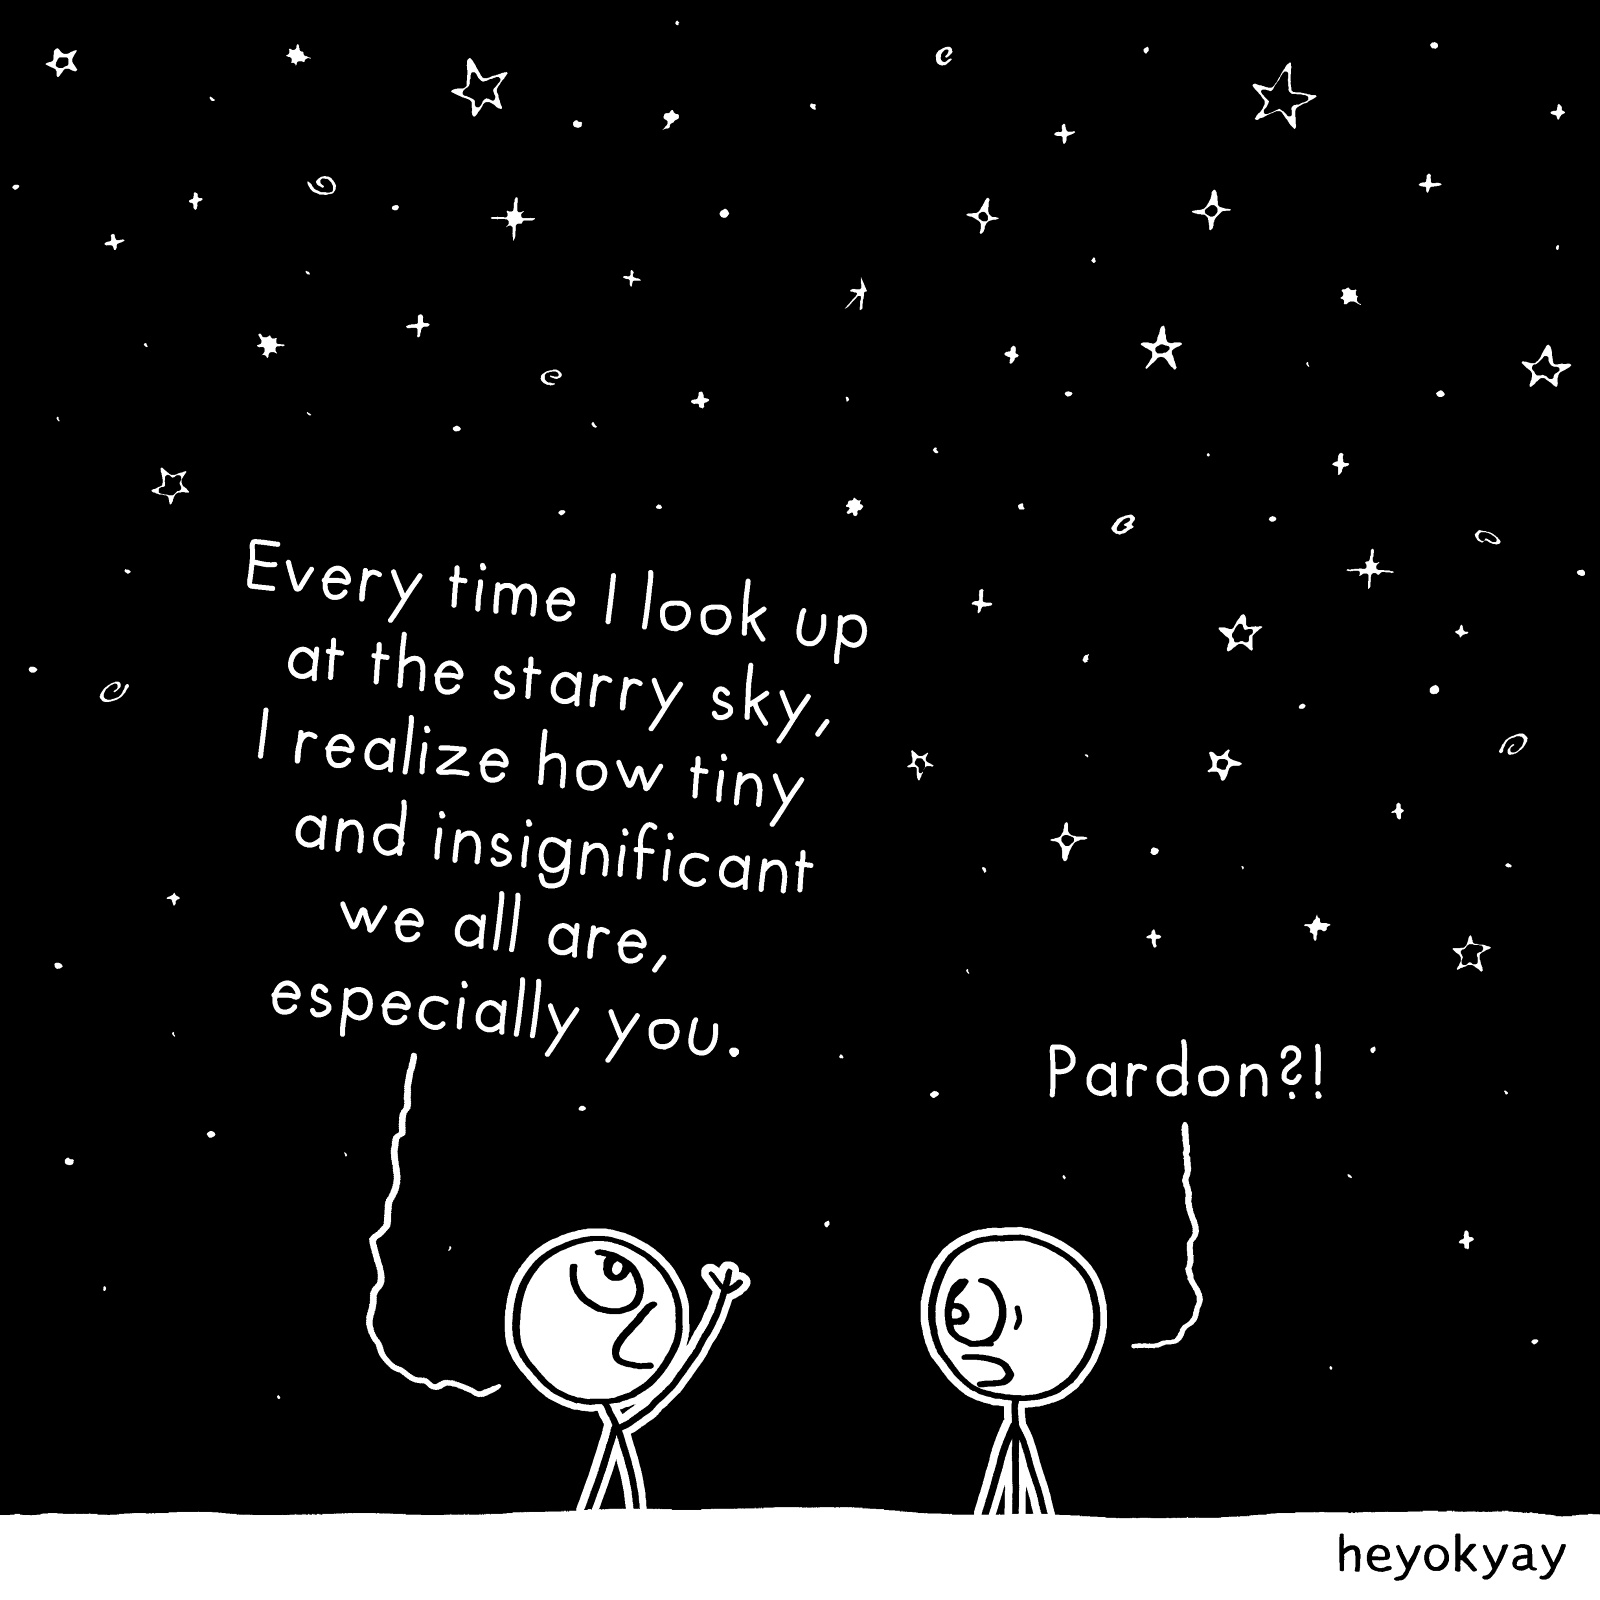 Every time I look up at the starry sky, I realize how tiny and insignificant we all are, especially you. Pardon?! Insignificant heyokyay comic